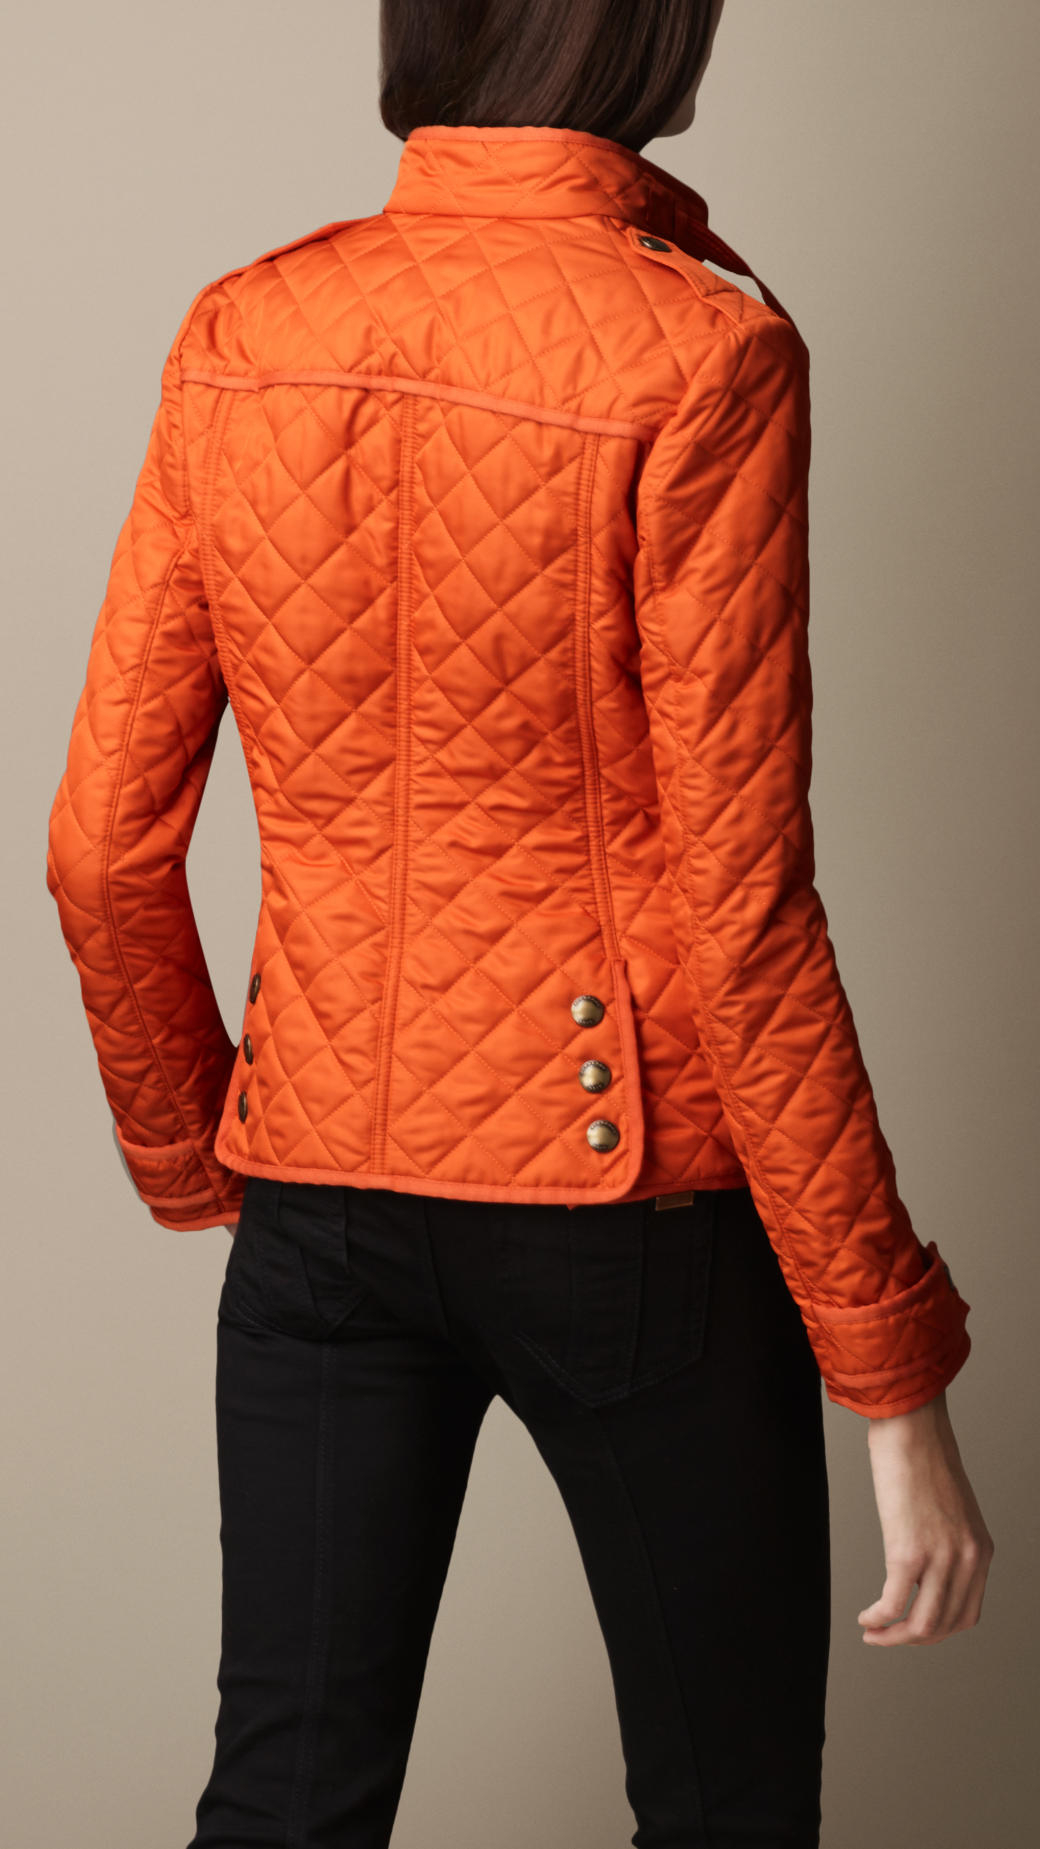 Lyst - Burberry Heritage Quilted Jacket in Orange